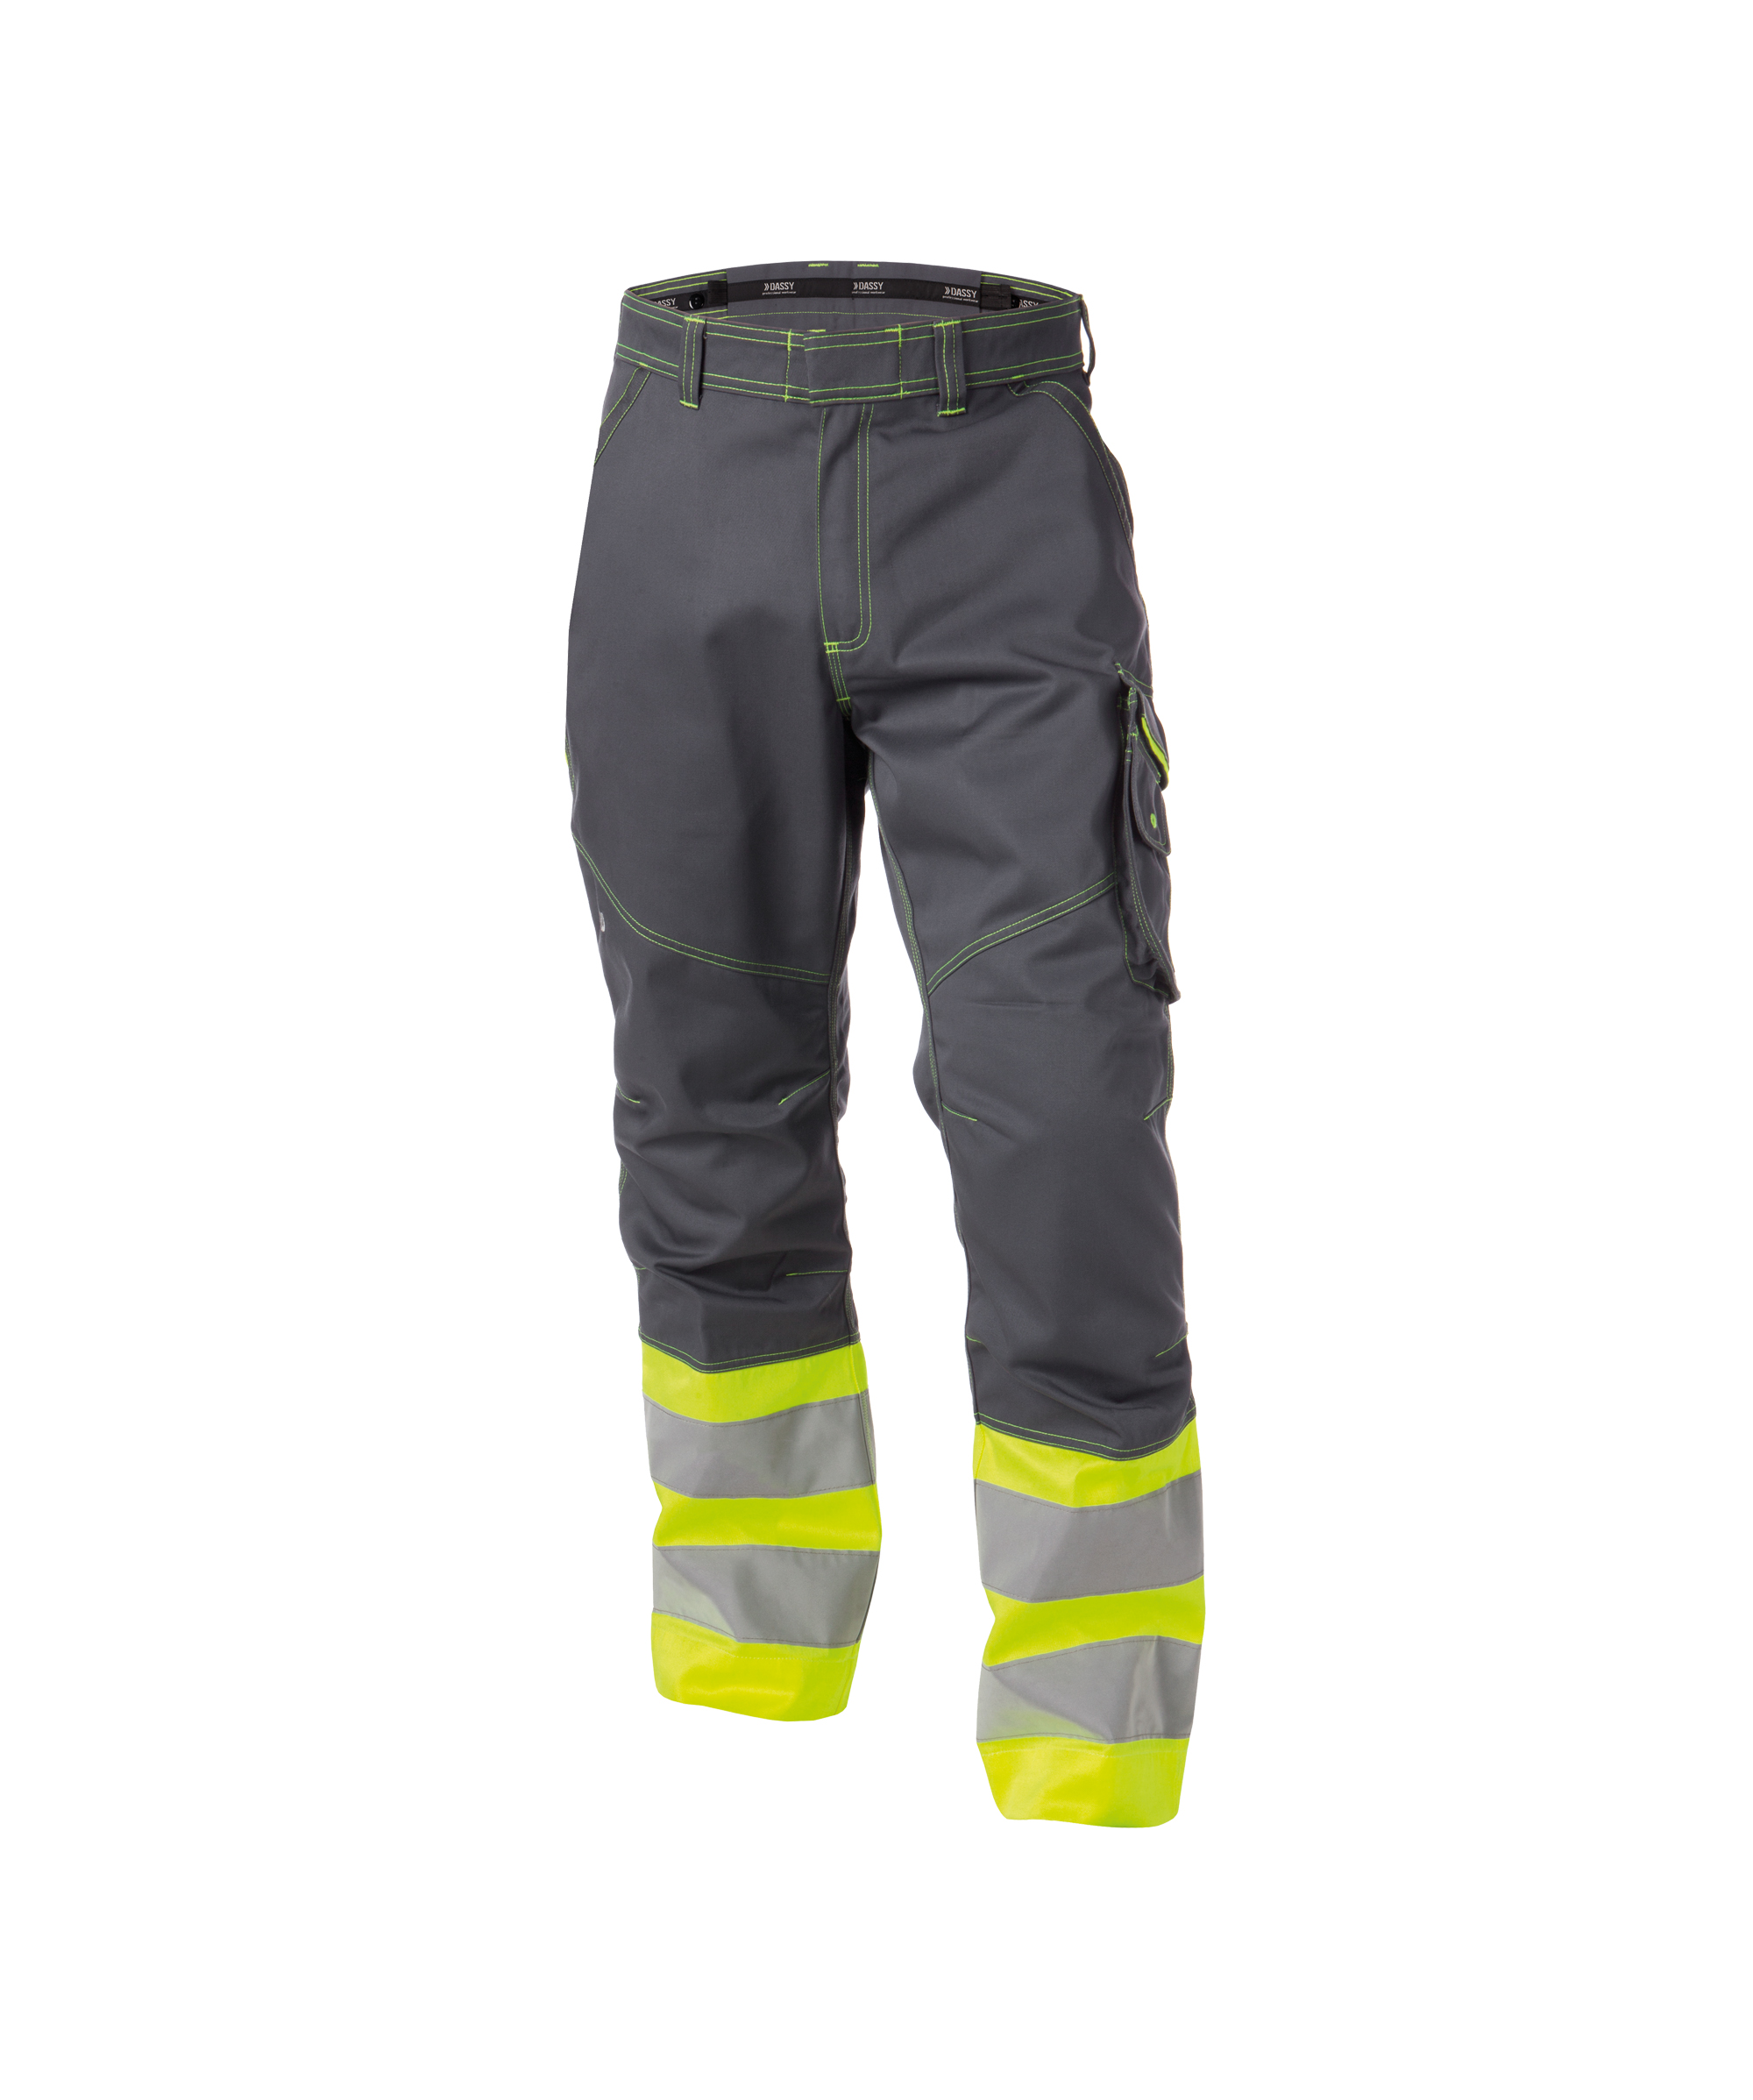 phoenix_high-visibility-work-trousers_cement-grey-fluo-yellow_front.jpg